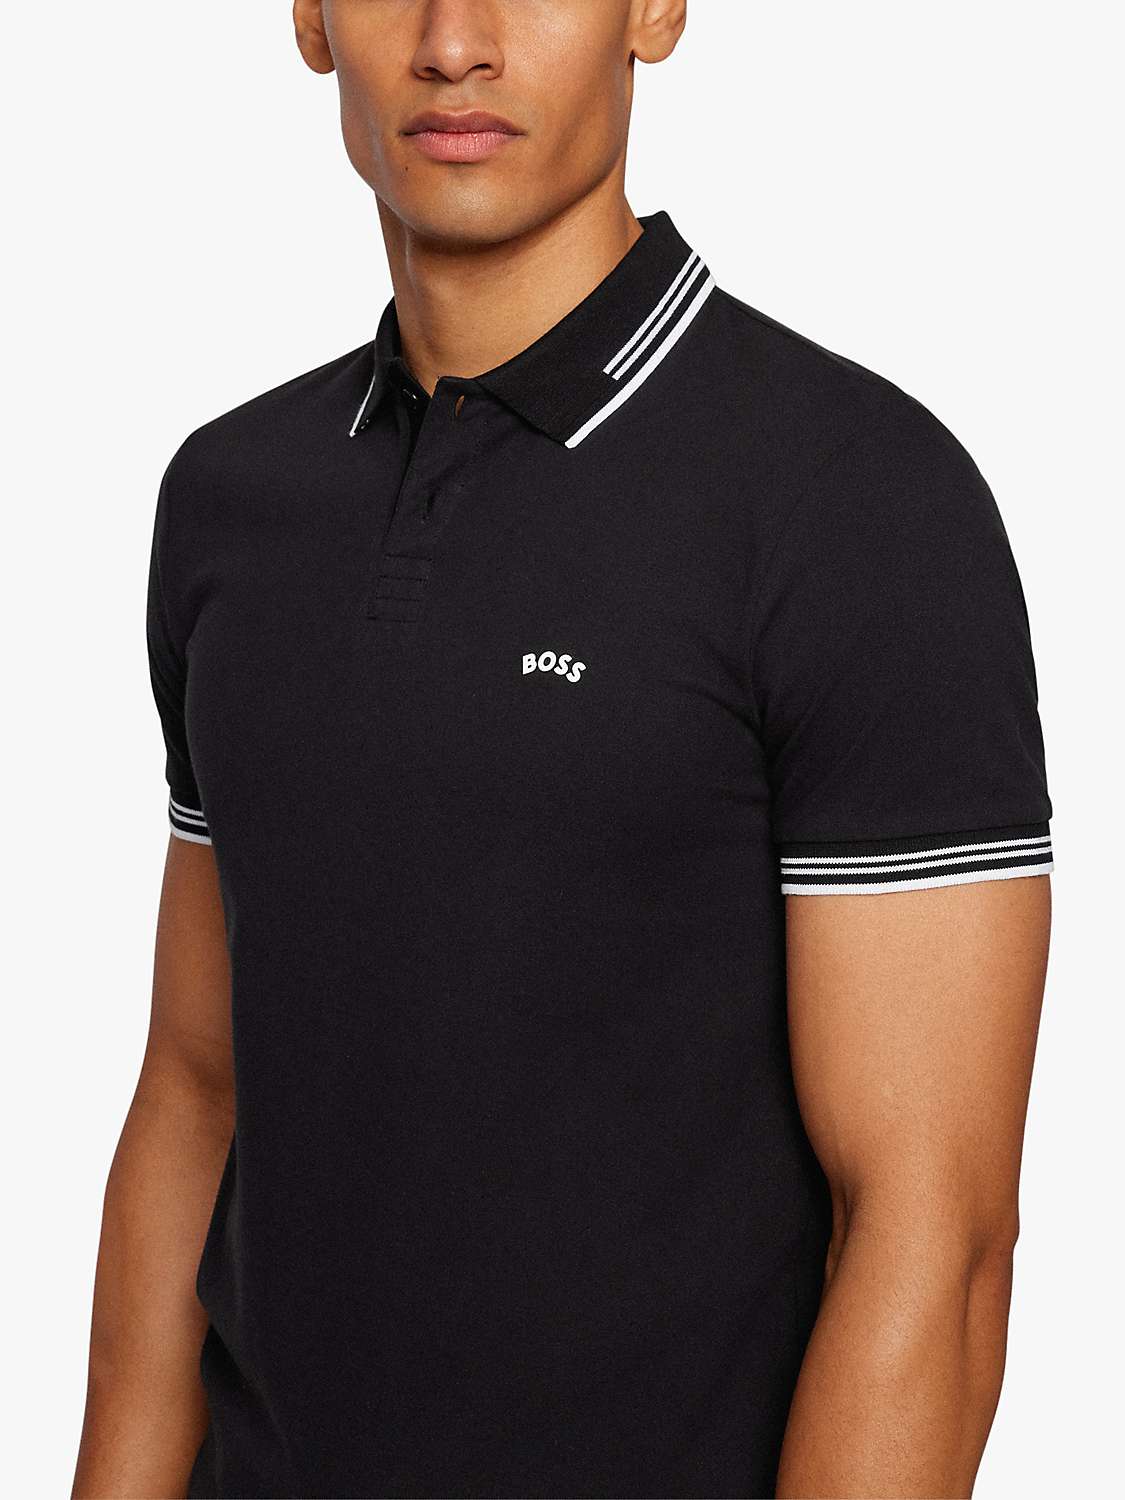 Buy BOSS Paul Curve Short Sleeve Polo Top Online at johnlewis.com